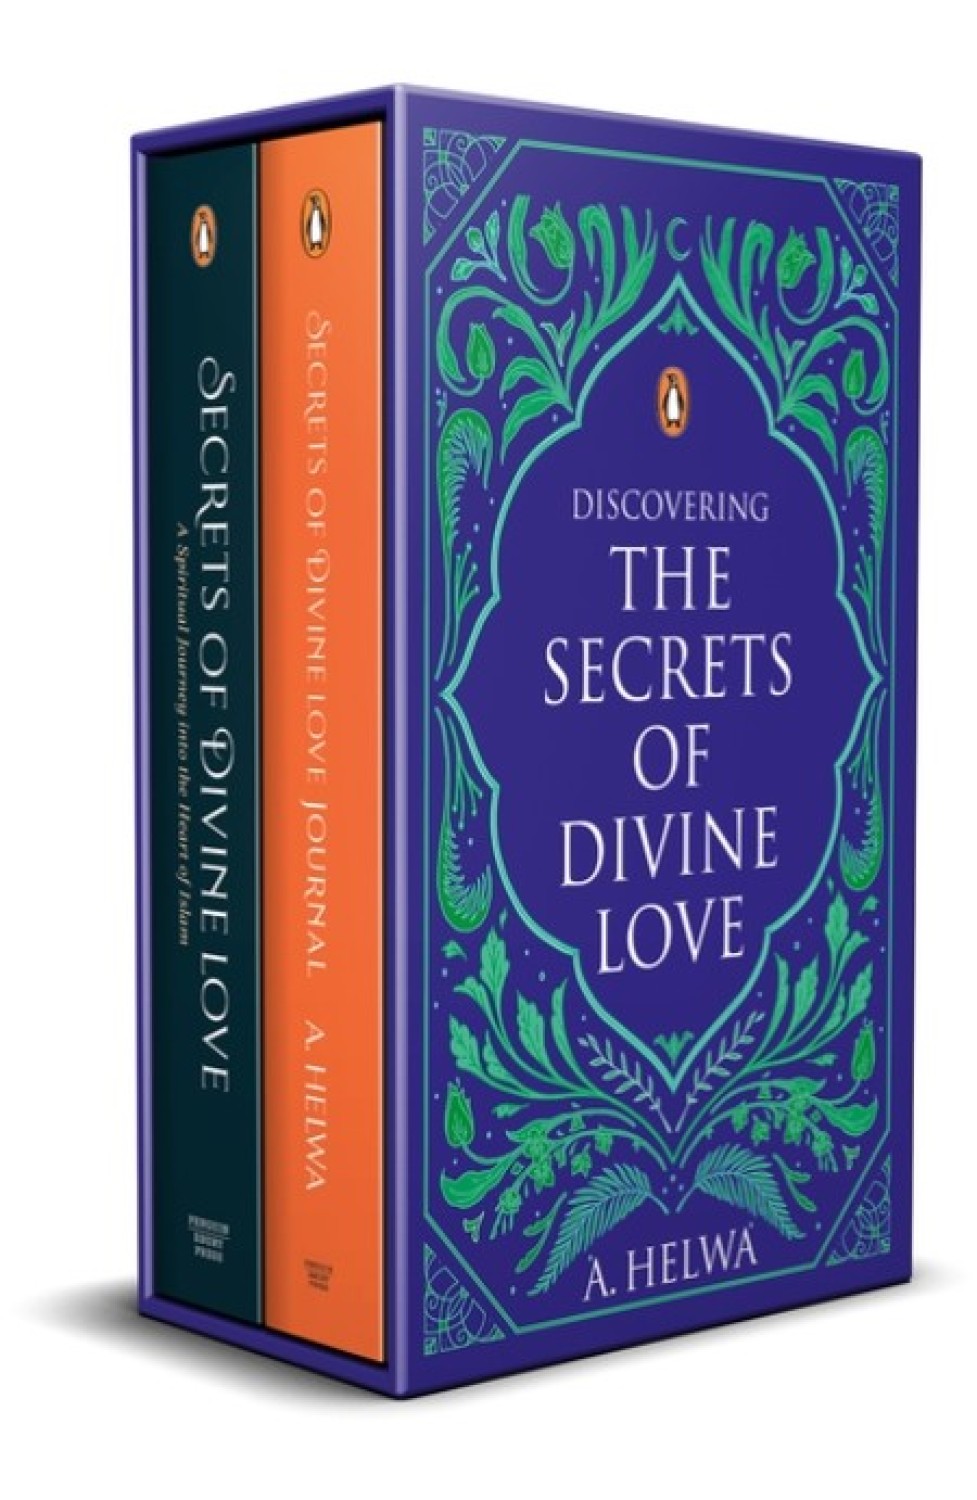 DISCOVERING THE SECRETS OF DIVINE LOVE